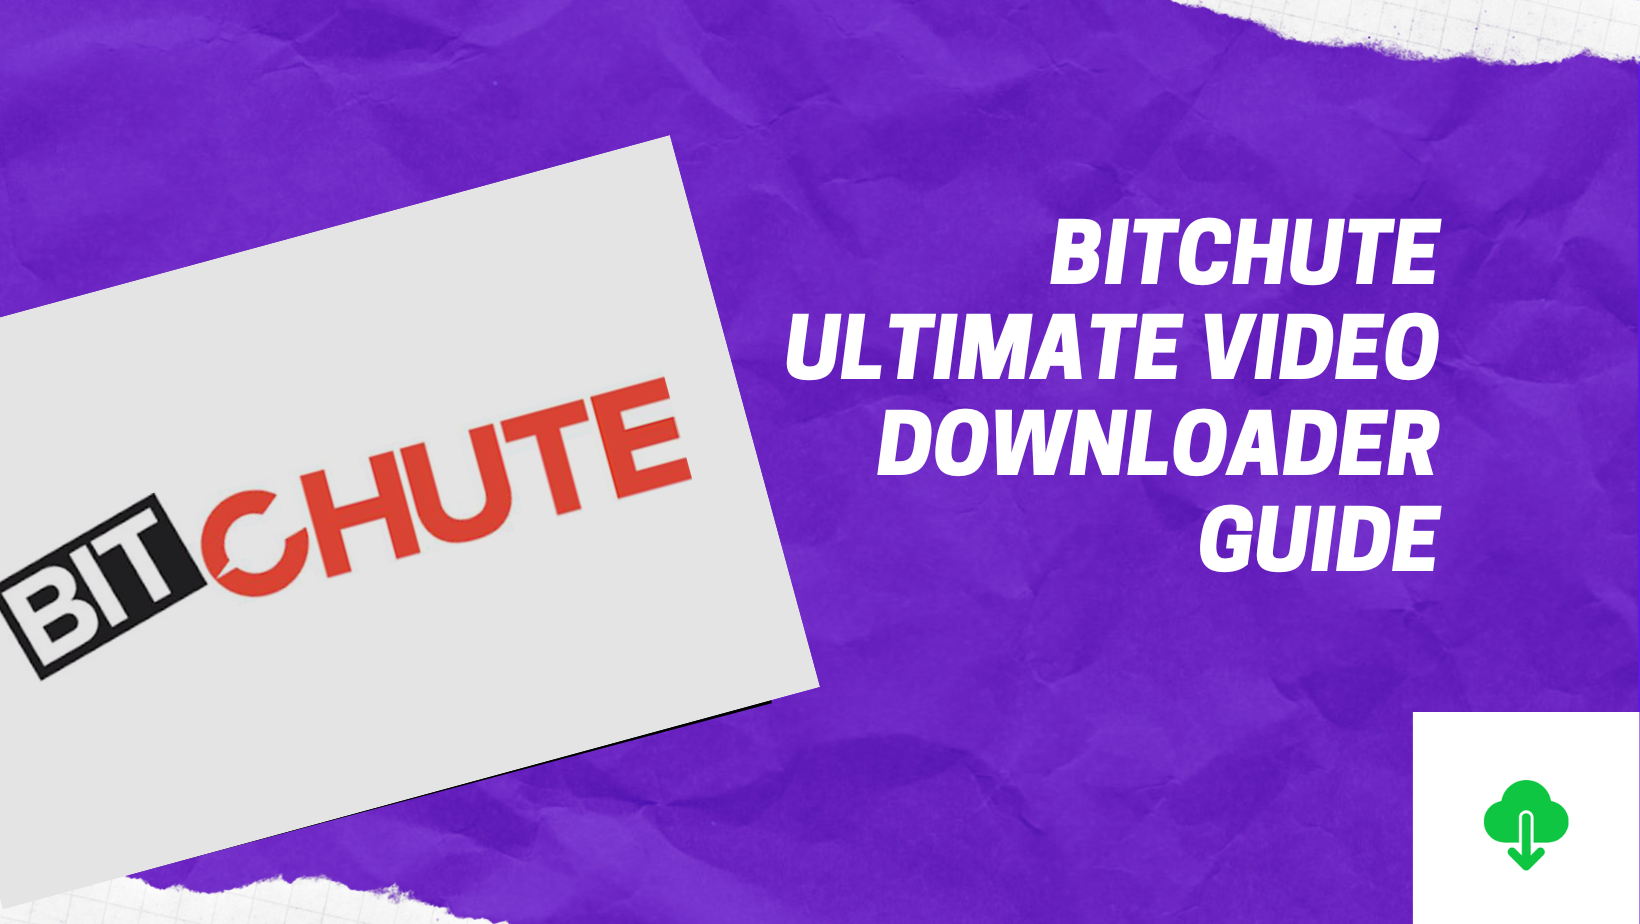 Easy Steps to Download Videos from BitChute in less than 2 Minutes